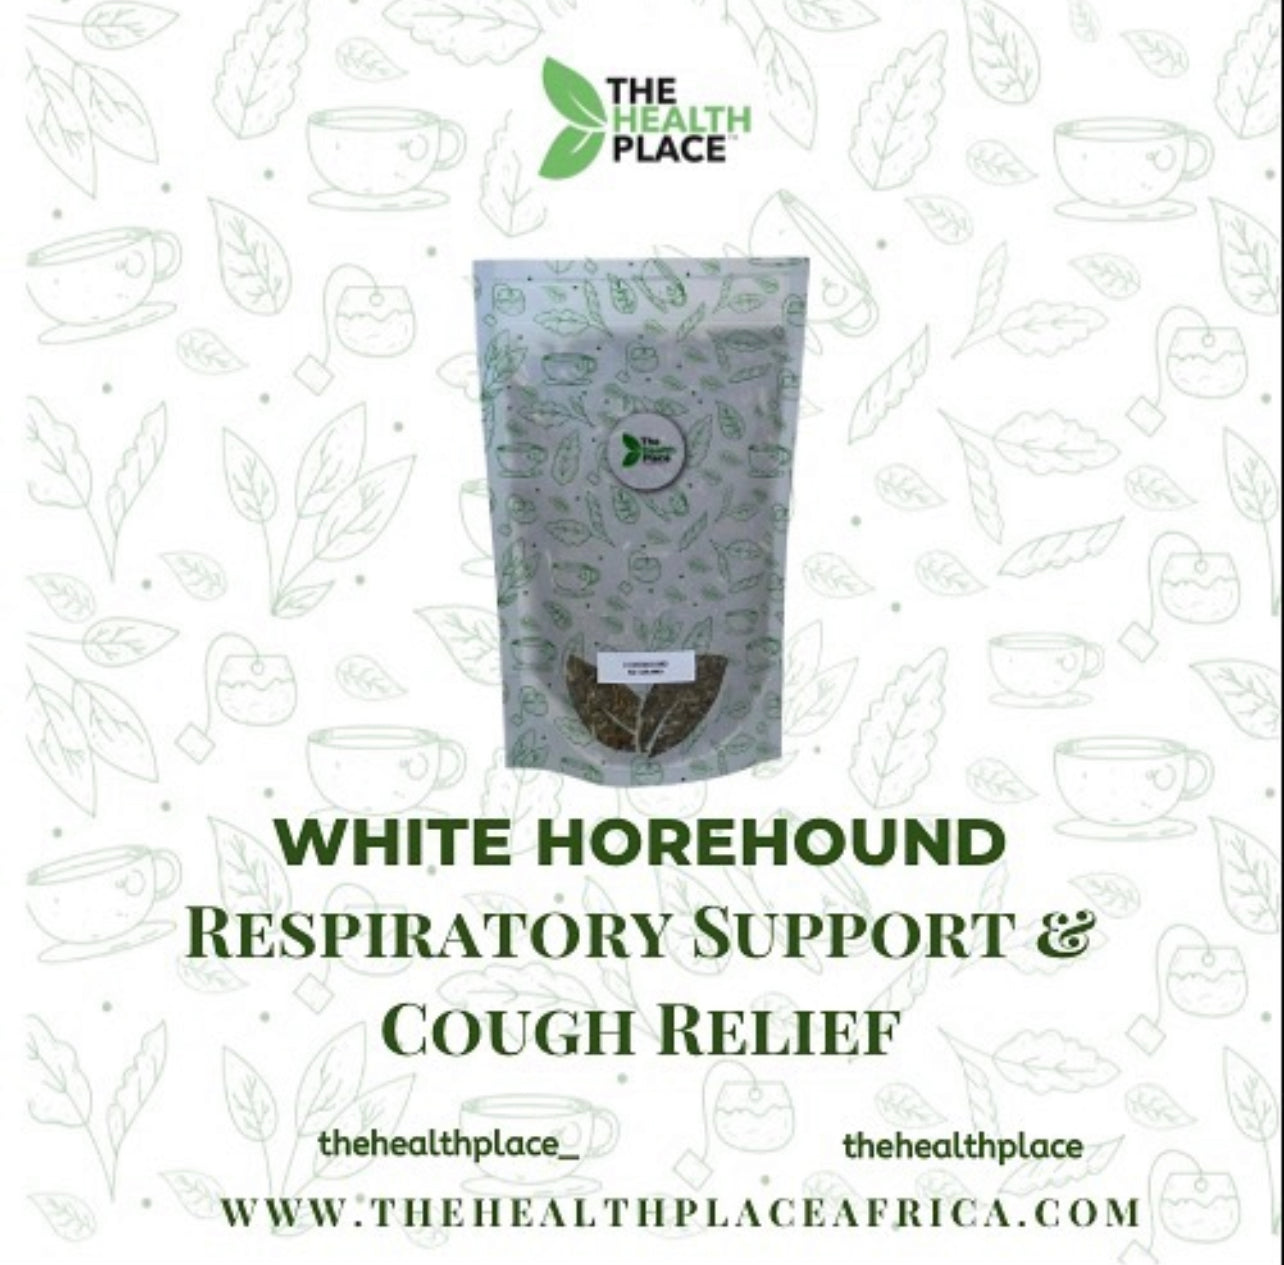 WHITE HOREHOUND- RESPIRATORY SUPPORT AND COUGH RELIEF